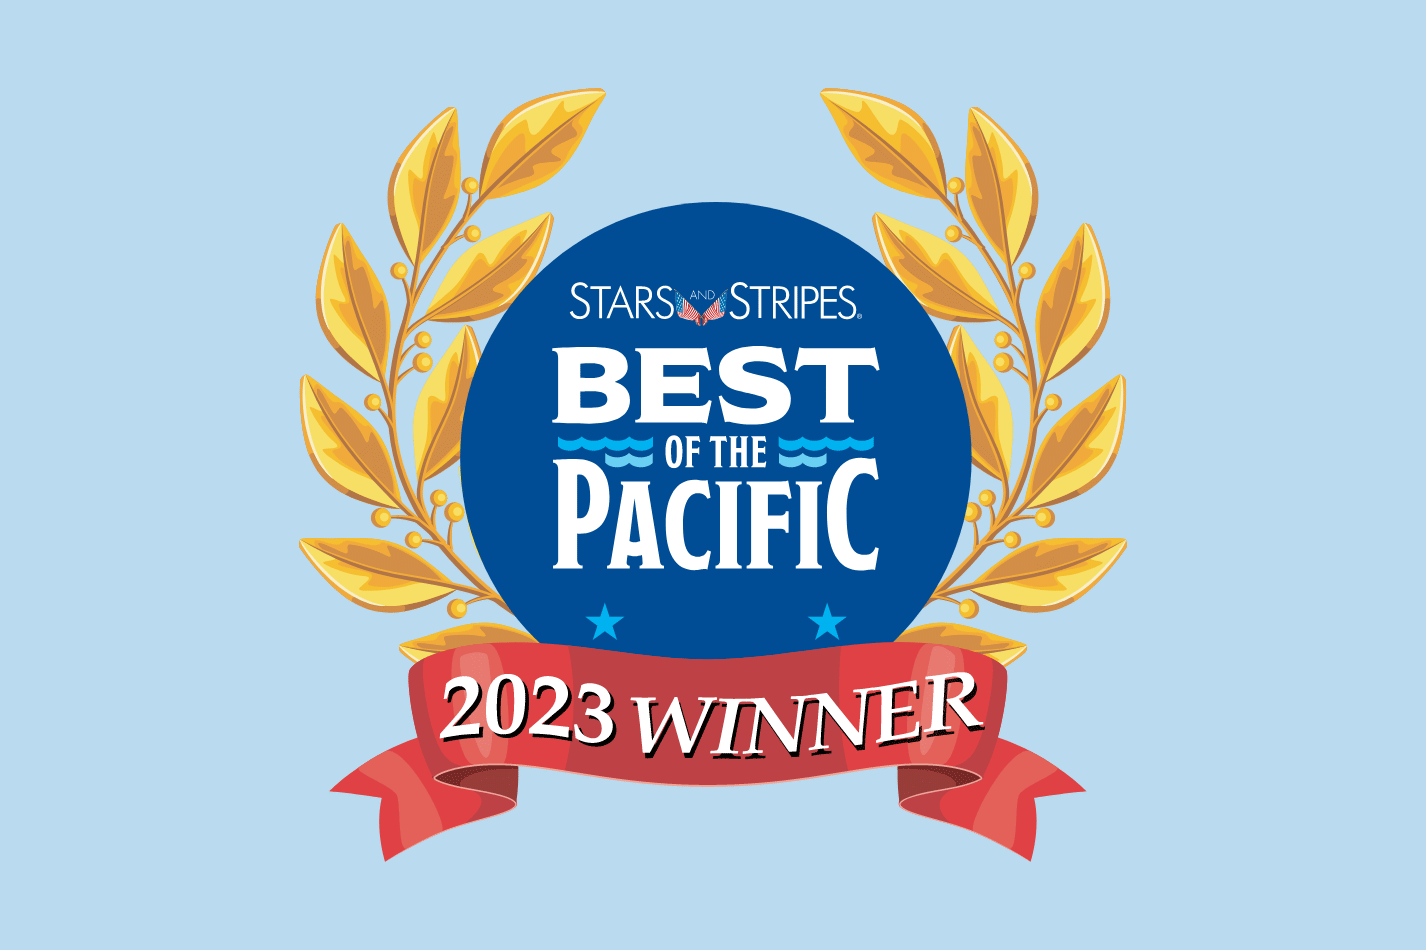 Best of Pacific